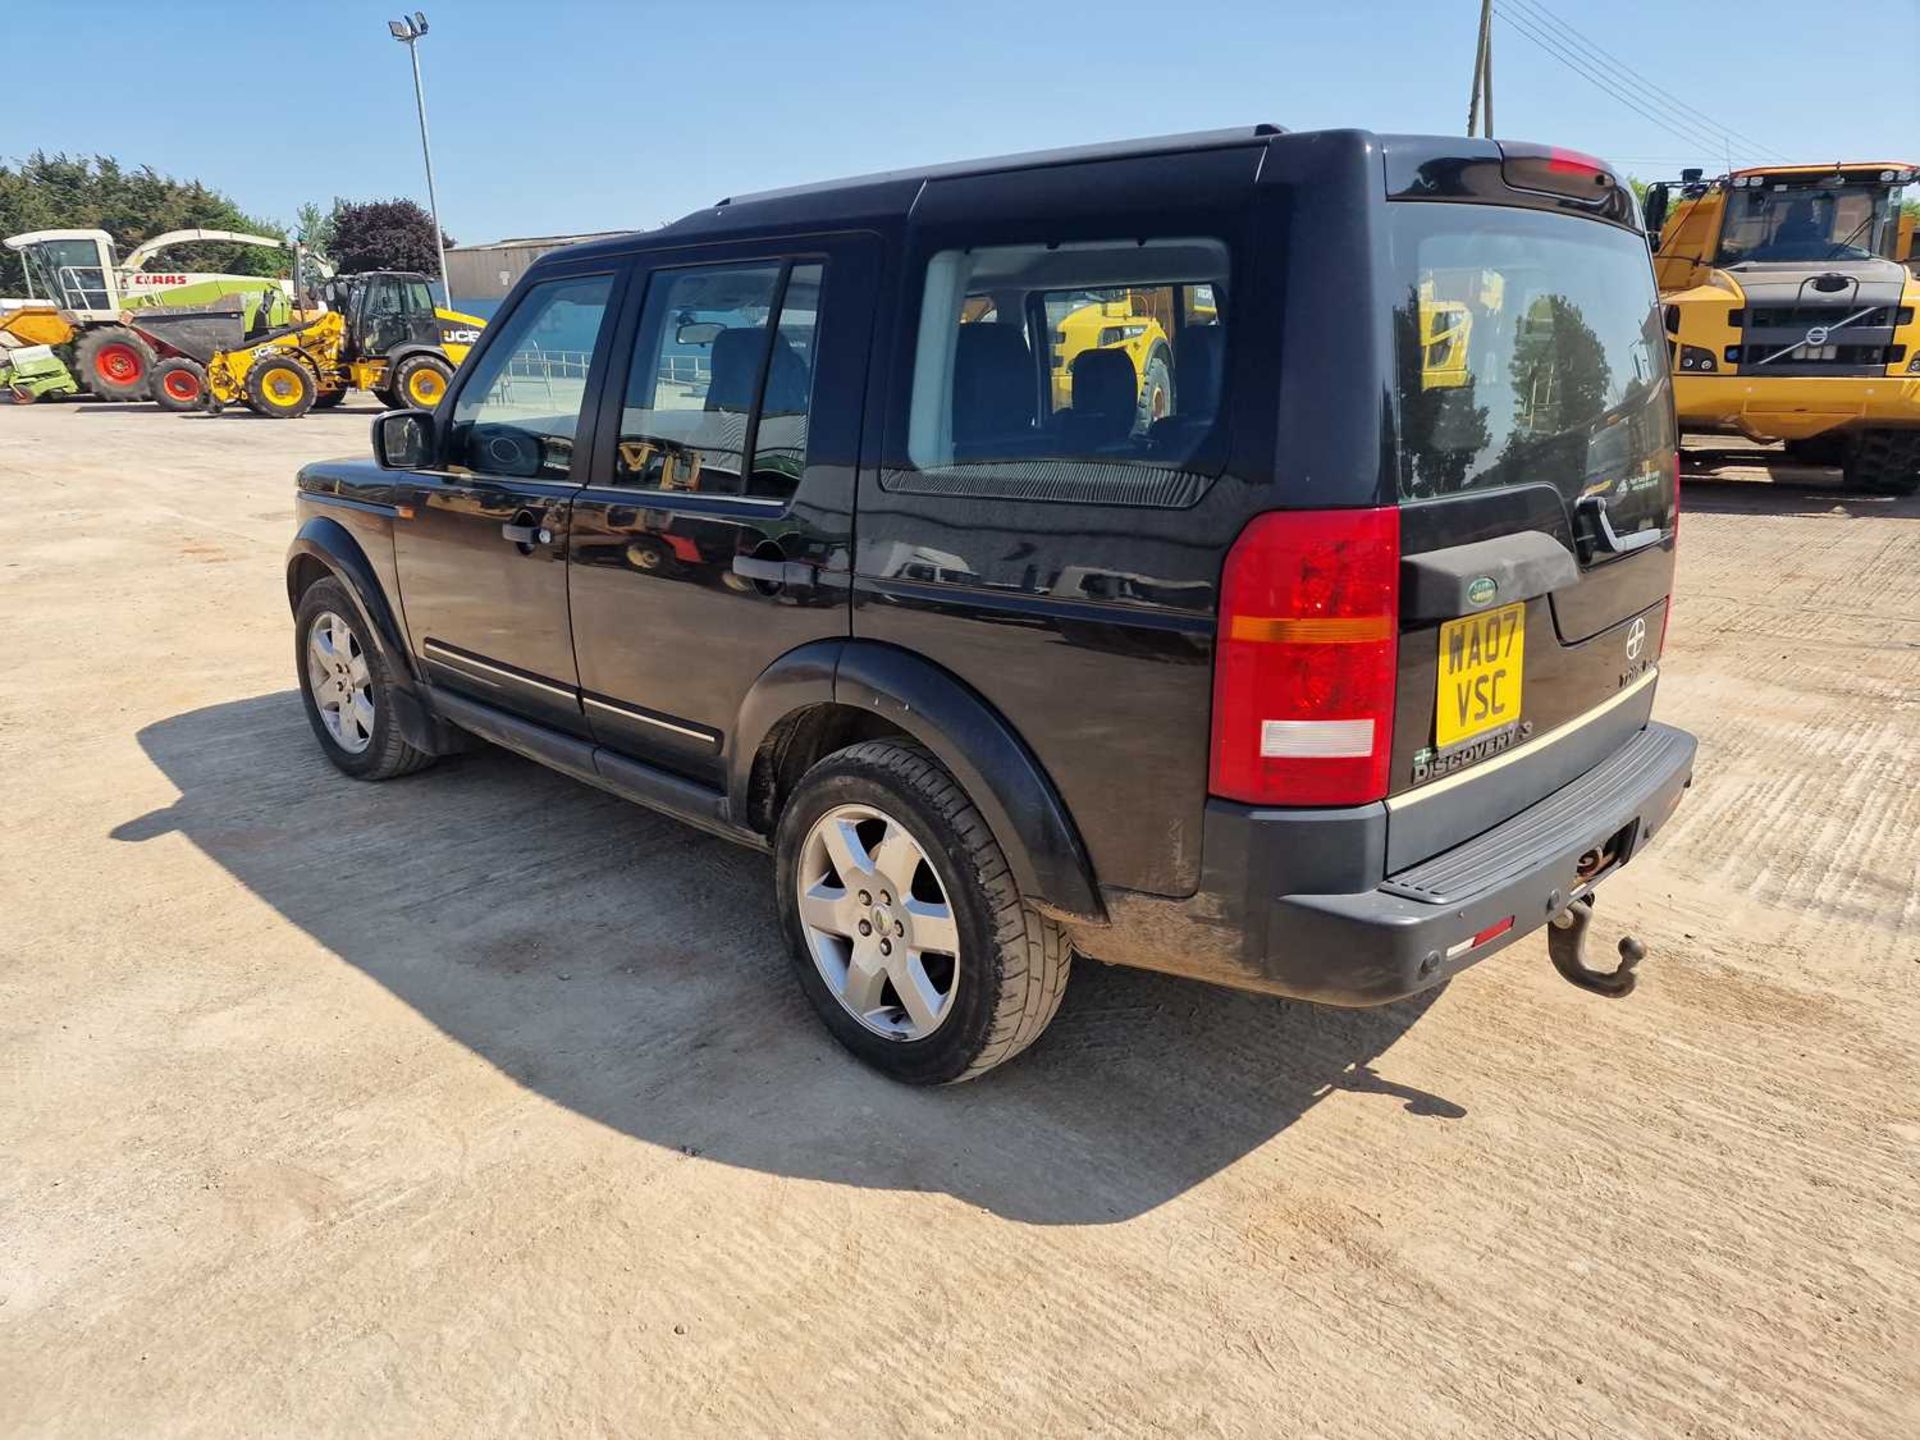 2007 Land Rover Discovery 3 TDV6 GS, 7 Seater, 6 Speed, Sat Nav, Parking Sensors, Full Leather, Clim - Image 29 of 52